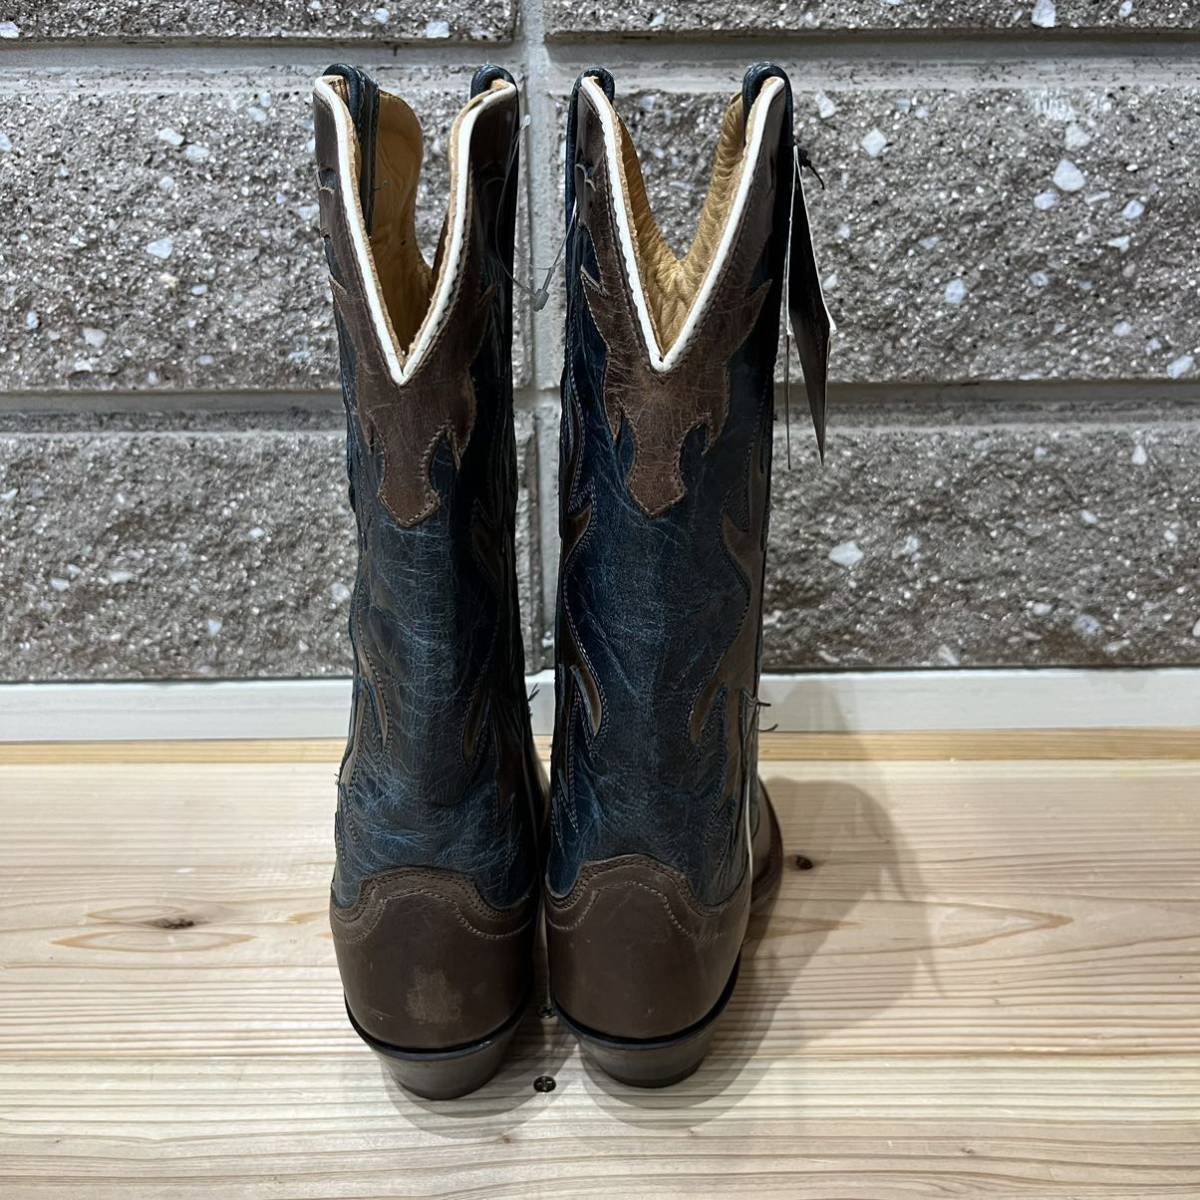  new goods regular price 32800 jpy Old West Old waist western boots can toli boots LF1526 original leather lady's size 7 sphere mc2222